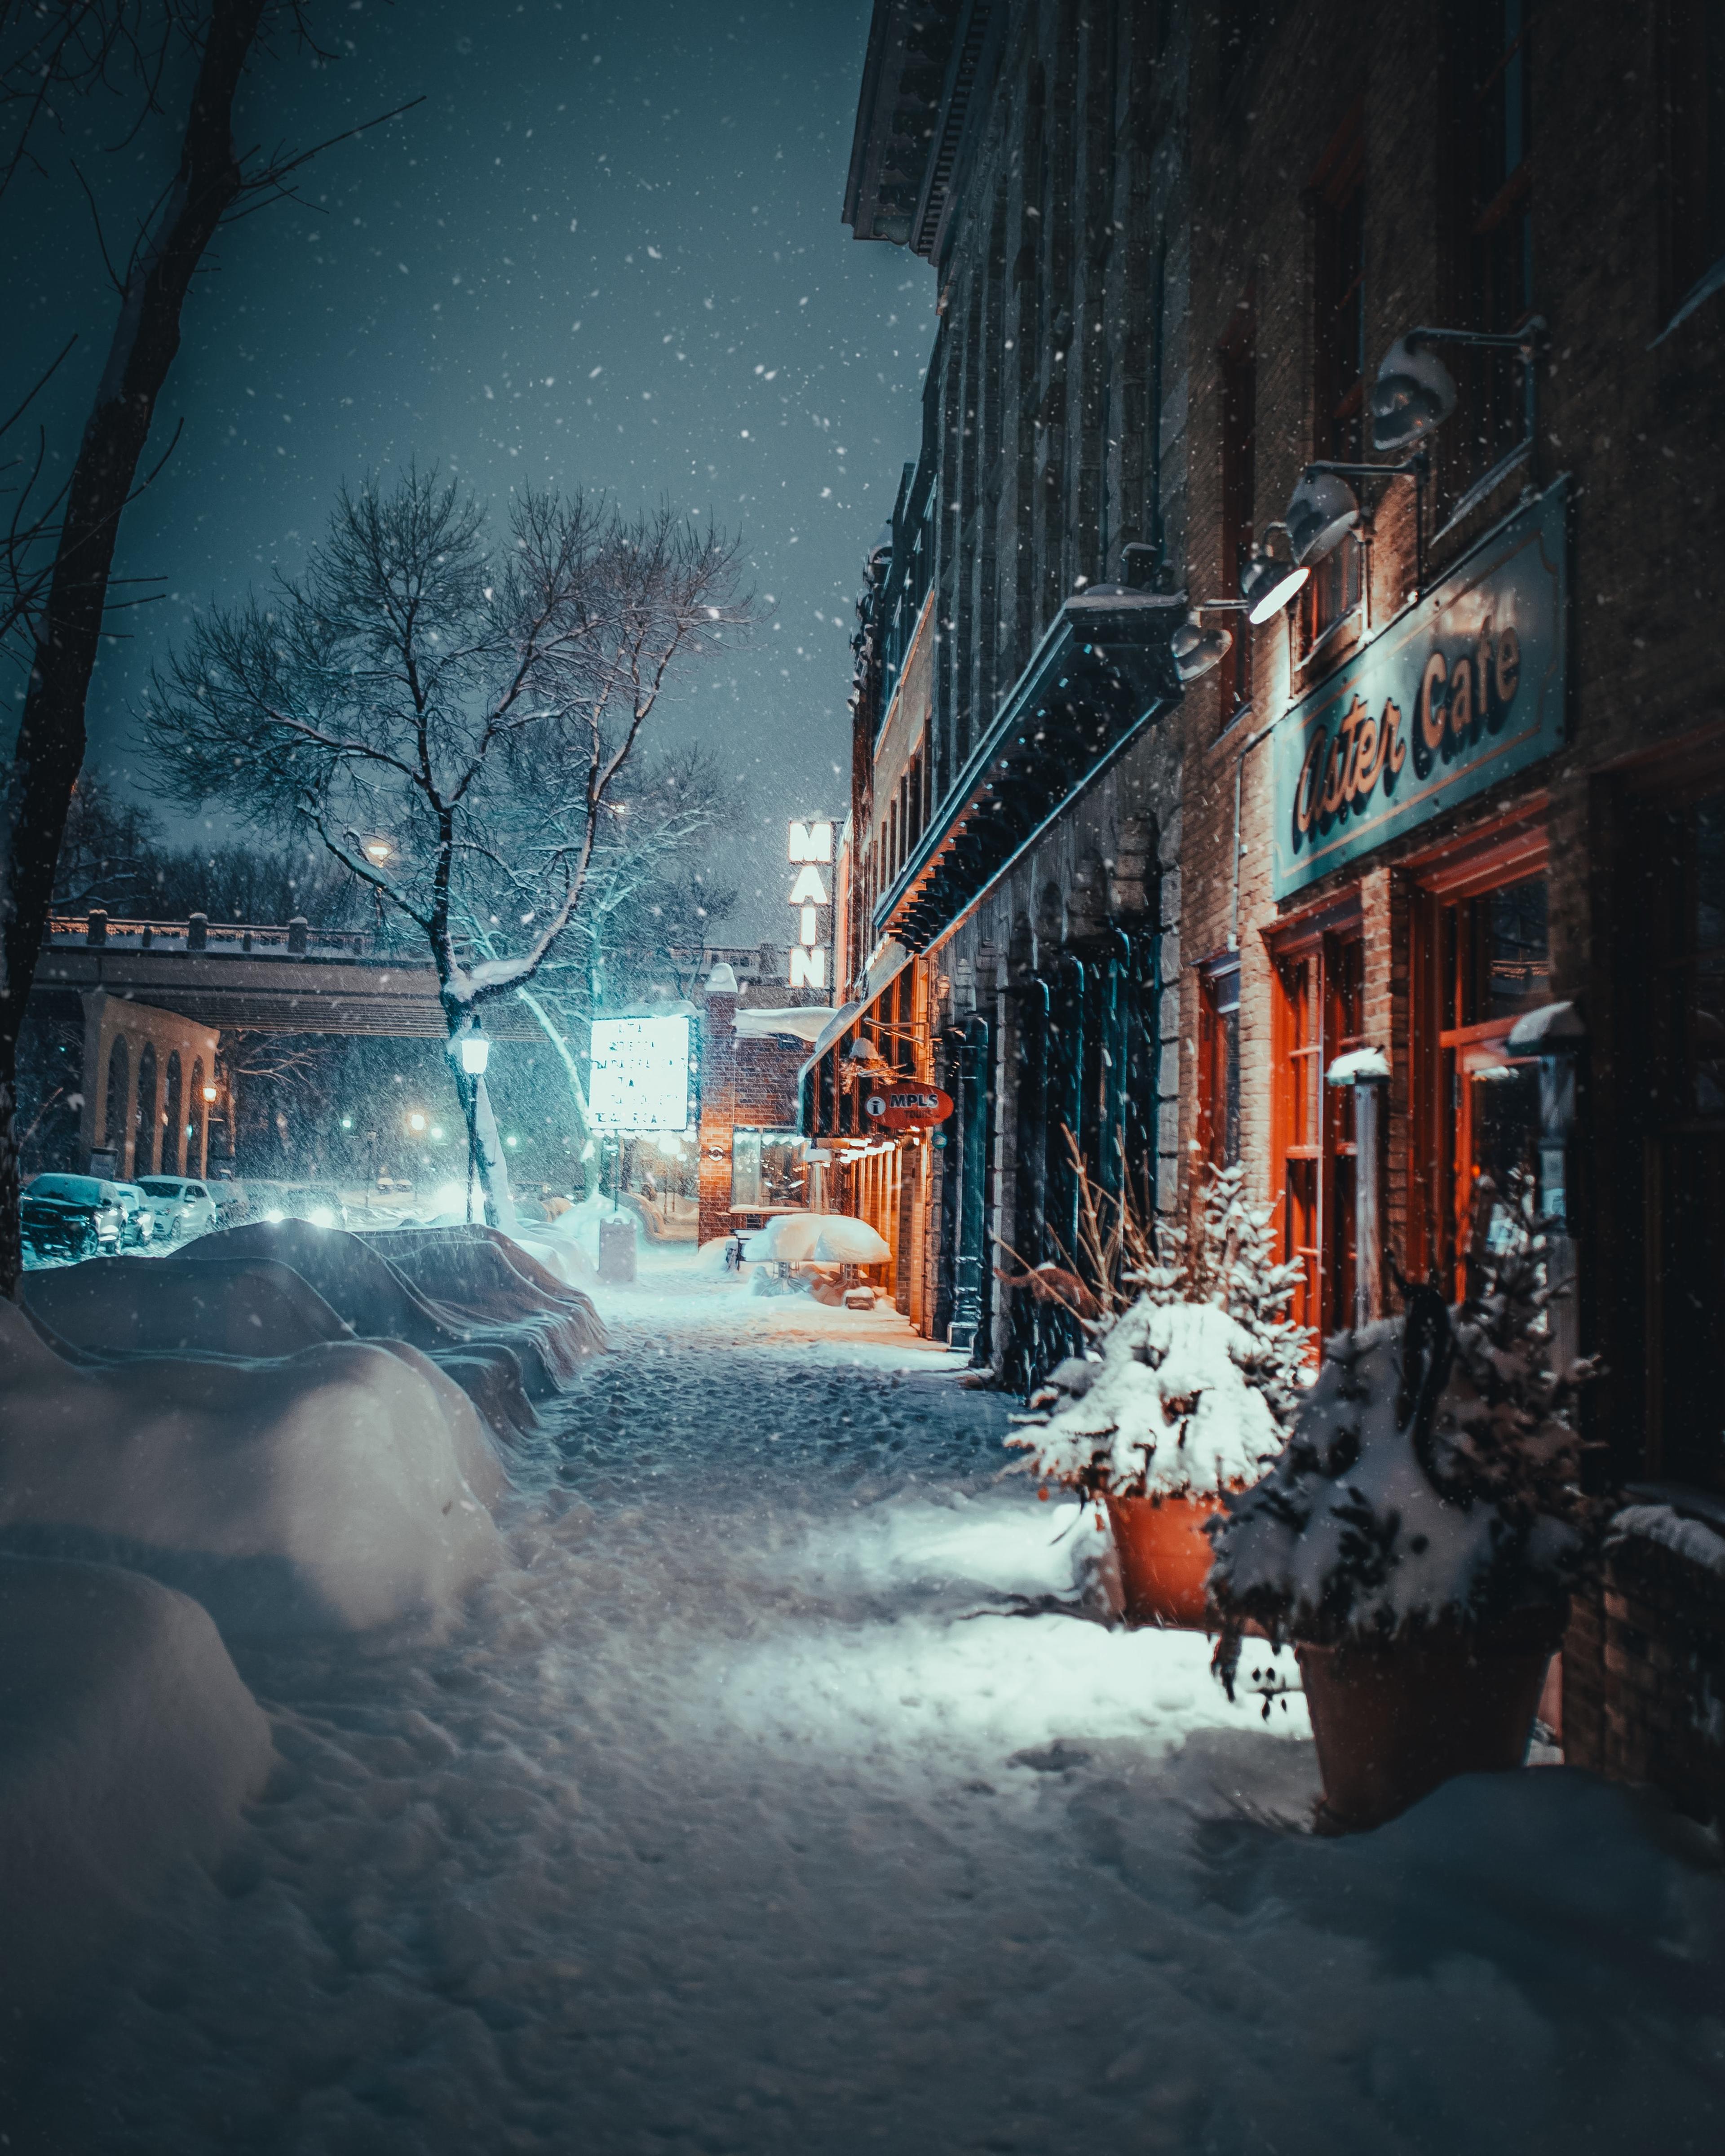 A snowy evening scene on a city street with warmly lit shop fronts, including a "Café," under a gentle snowfall, with a tranquil, holiday ambiance.